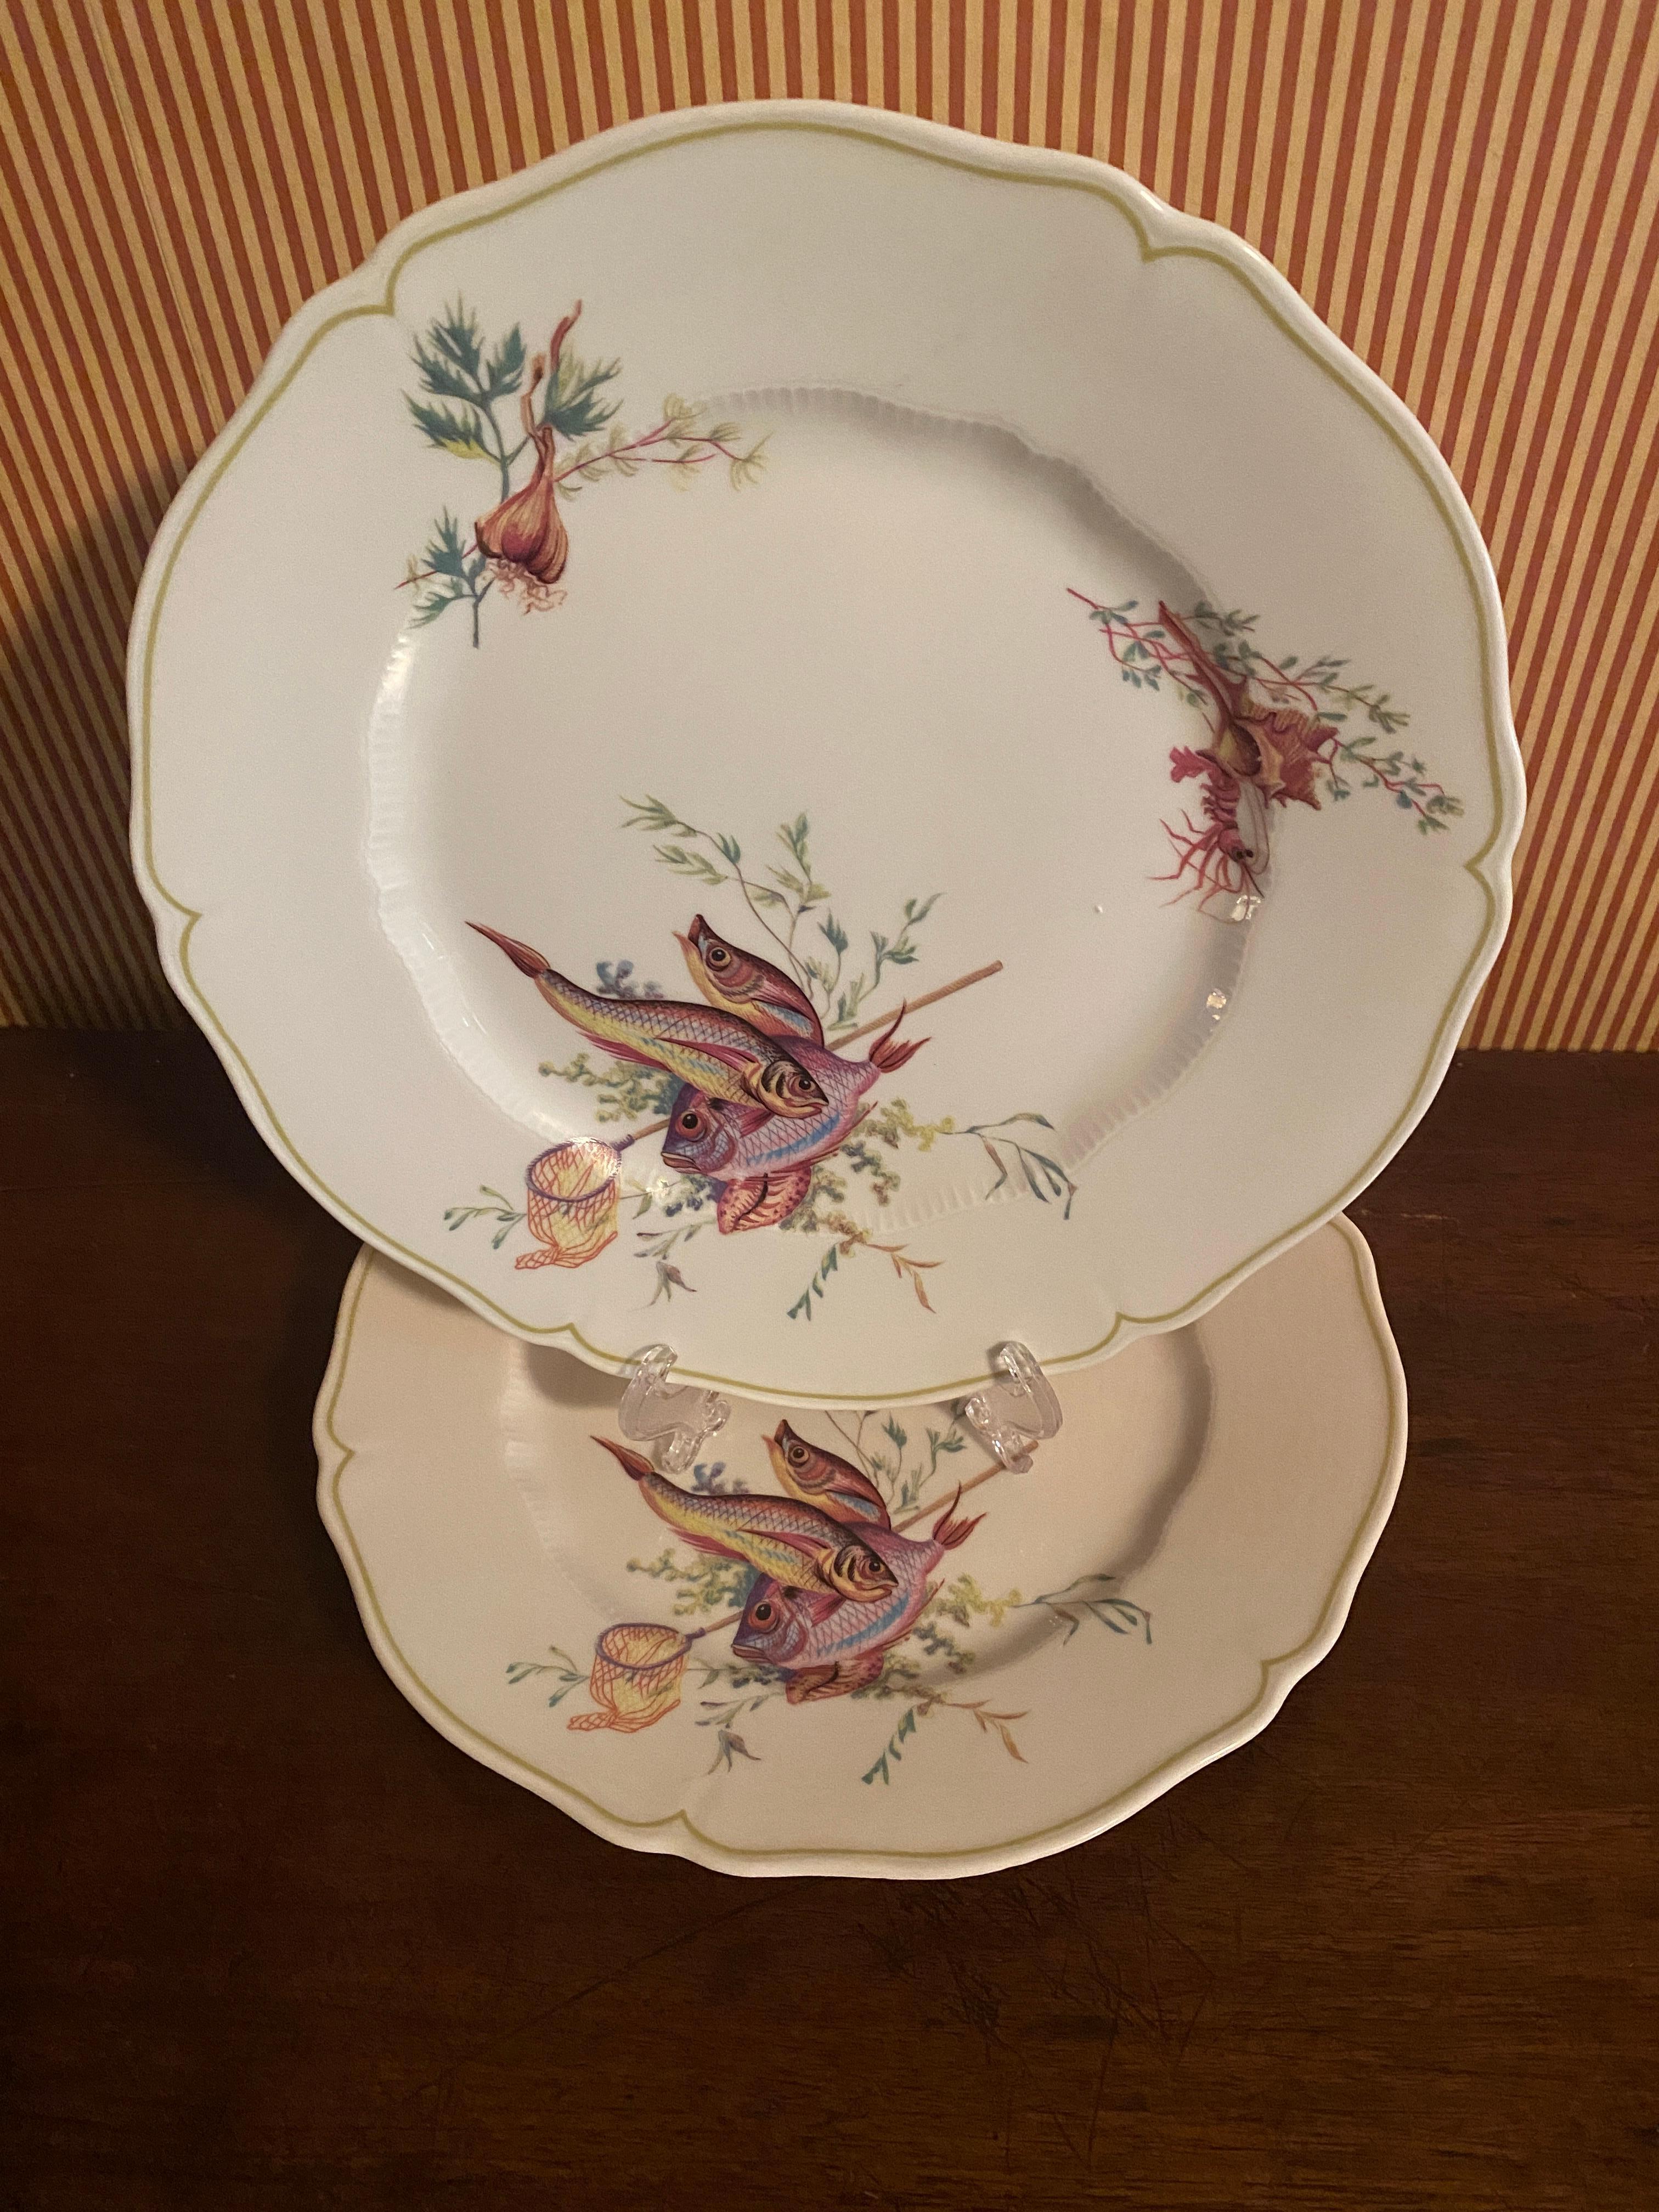 Set of 12 Havilland- Limoges Dinner Plates, Six Fish and Crustacean Designs For Sale 3